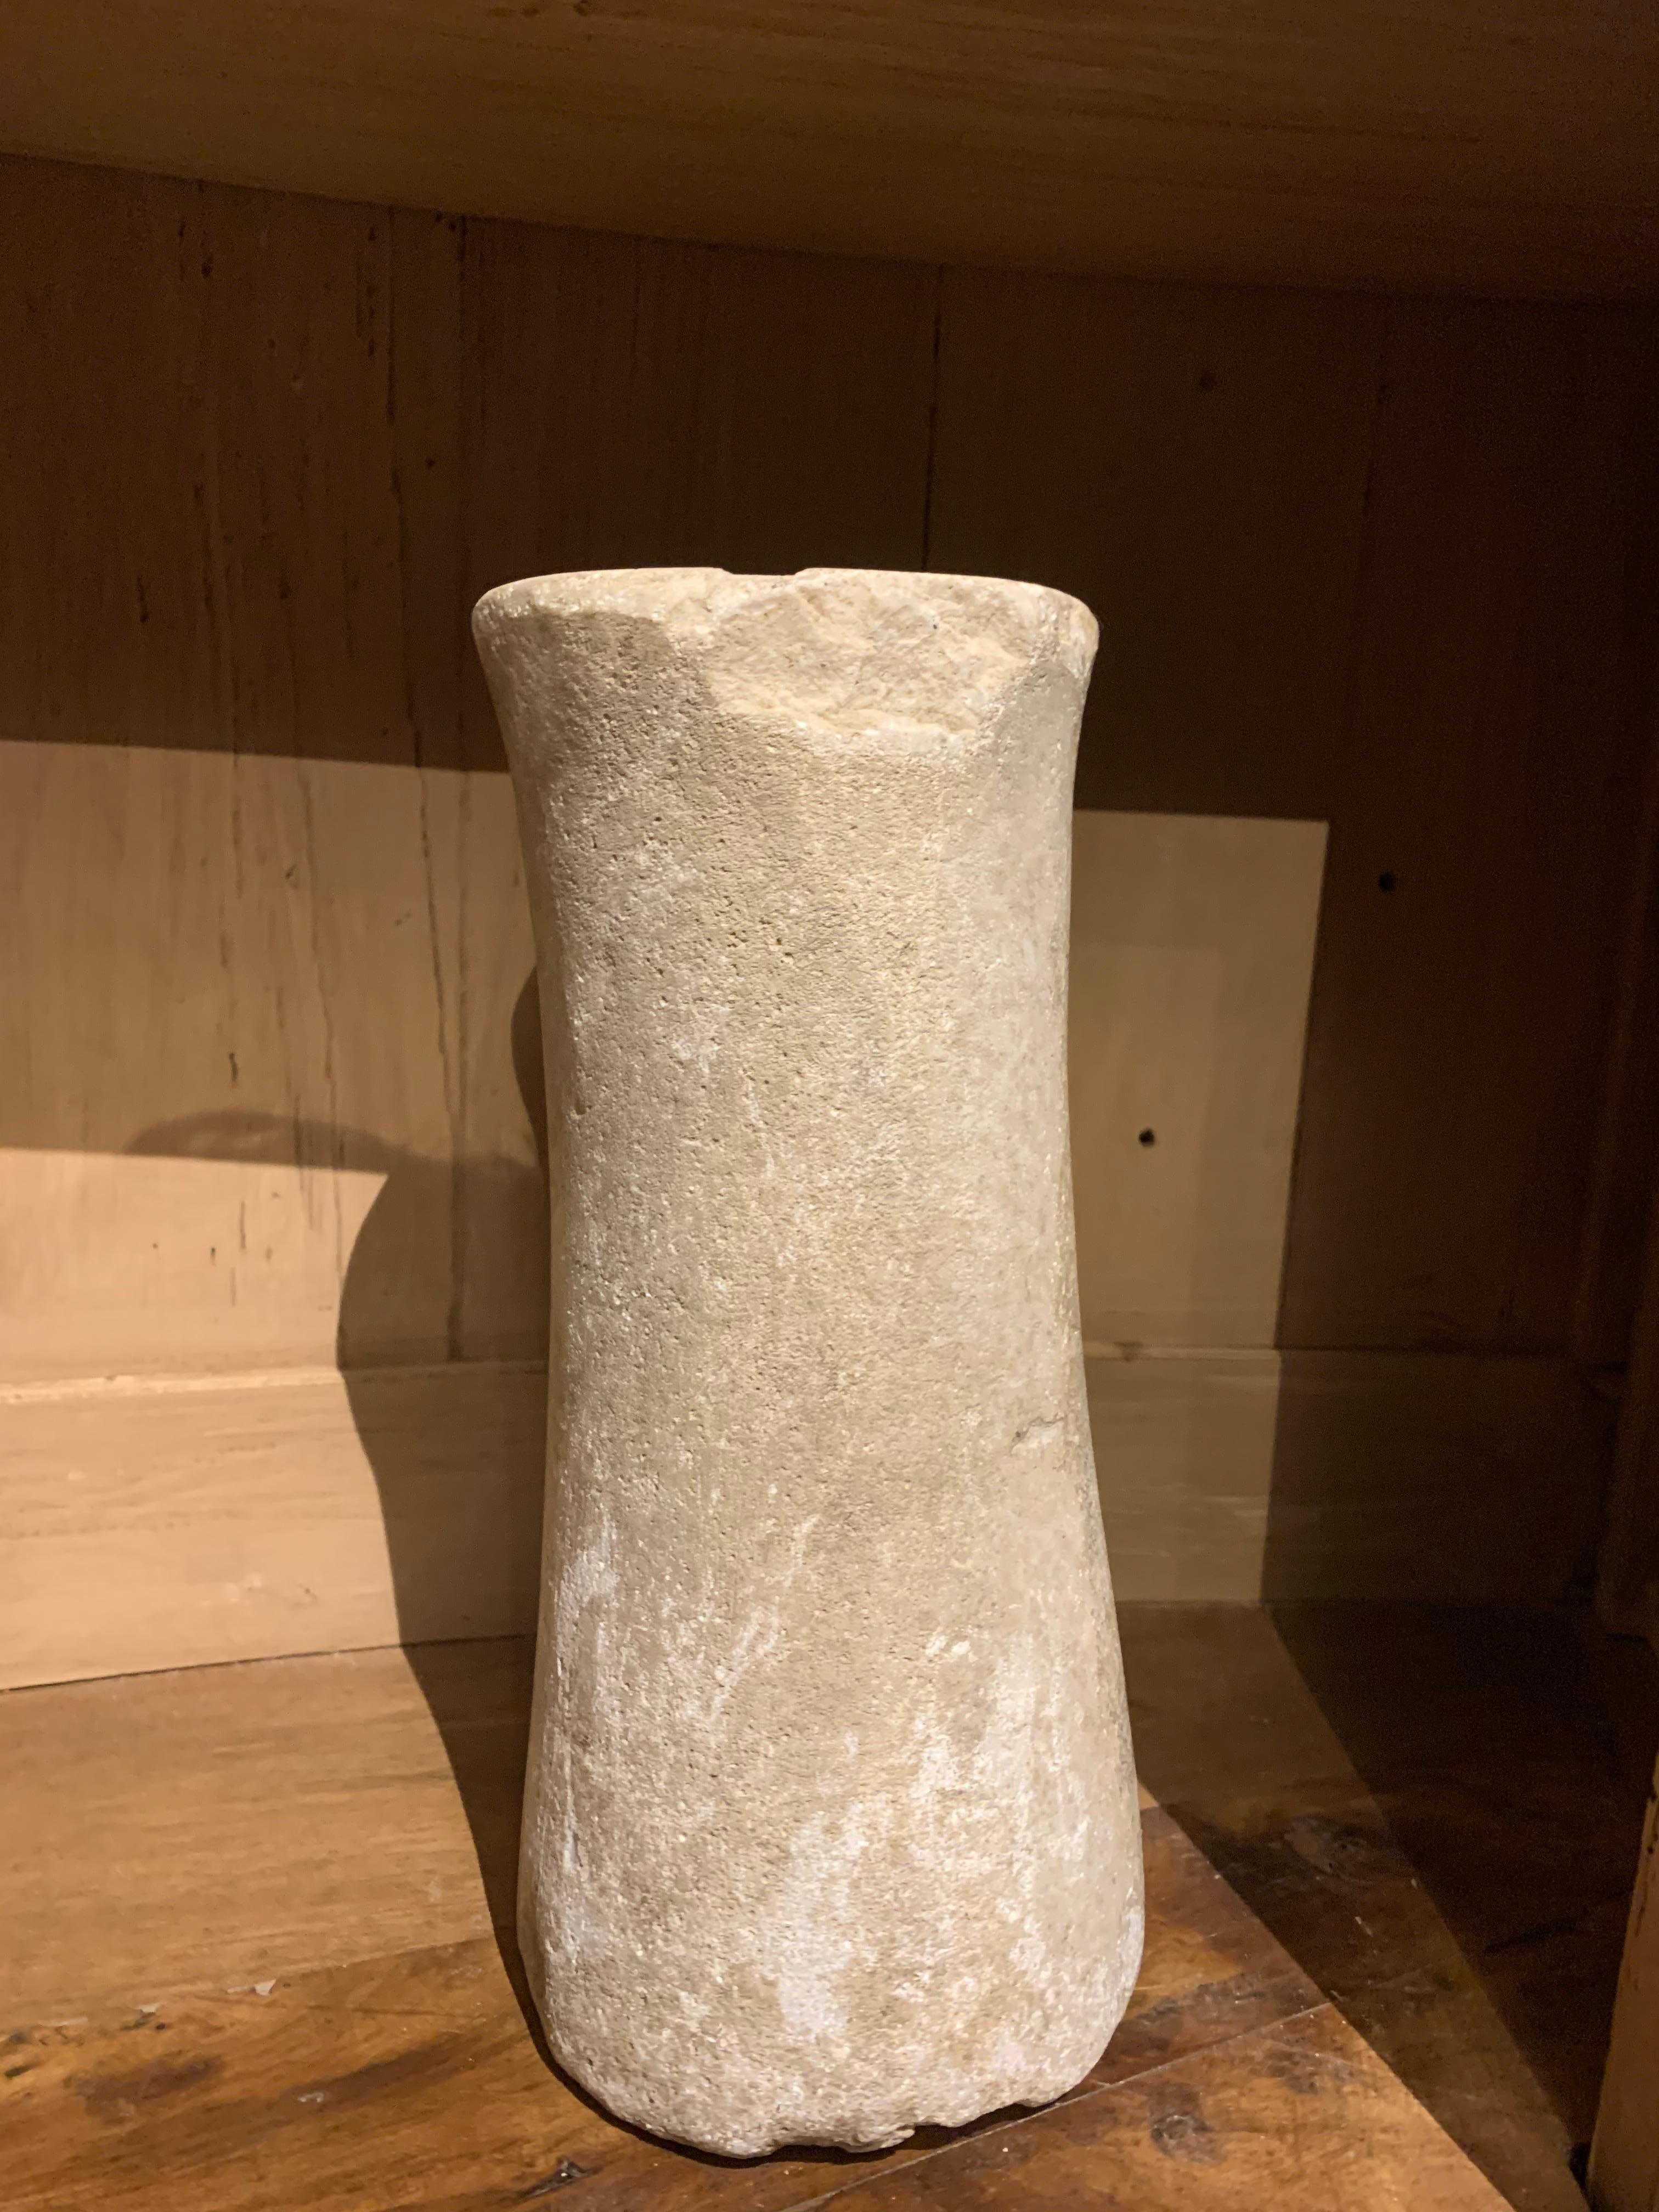 Bactrian sandstone column idol, circa 3000-2000 BC. It has an elegant tapering form with a undeep groove running on the top. The colomns t has incrustation on the side where it laid on the sand and the vains are deepened with time. The incrustated